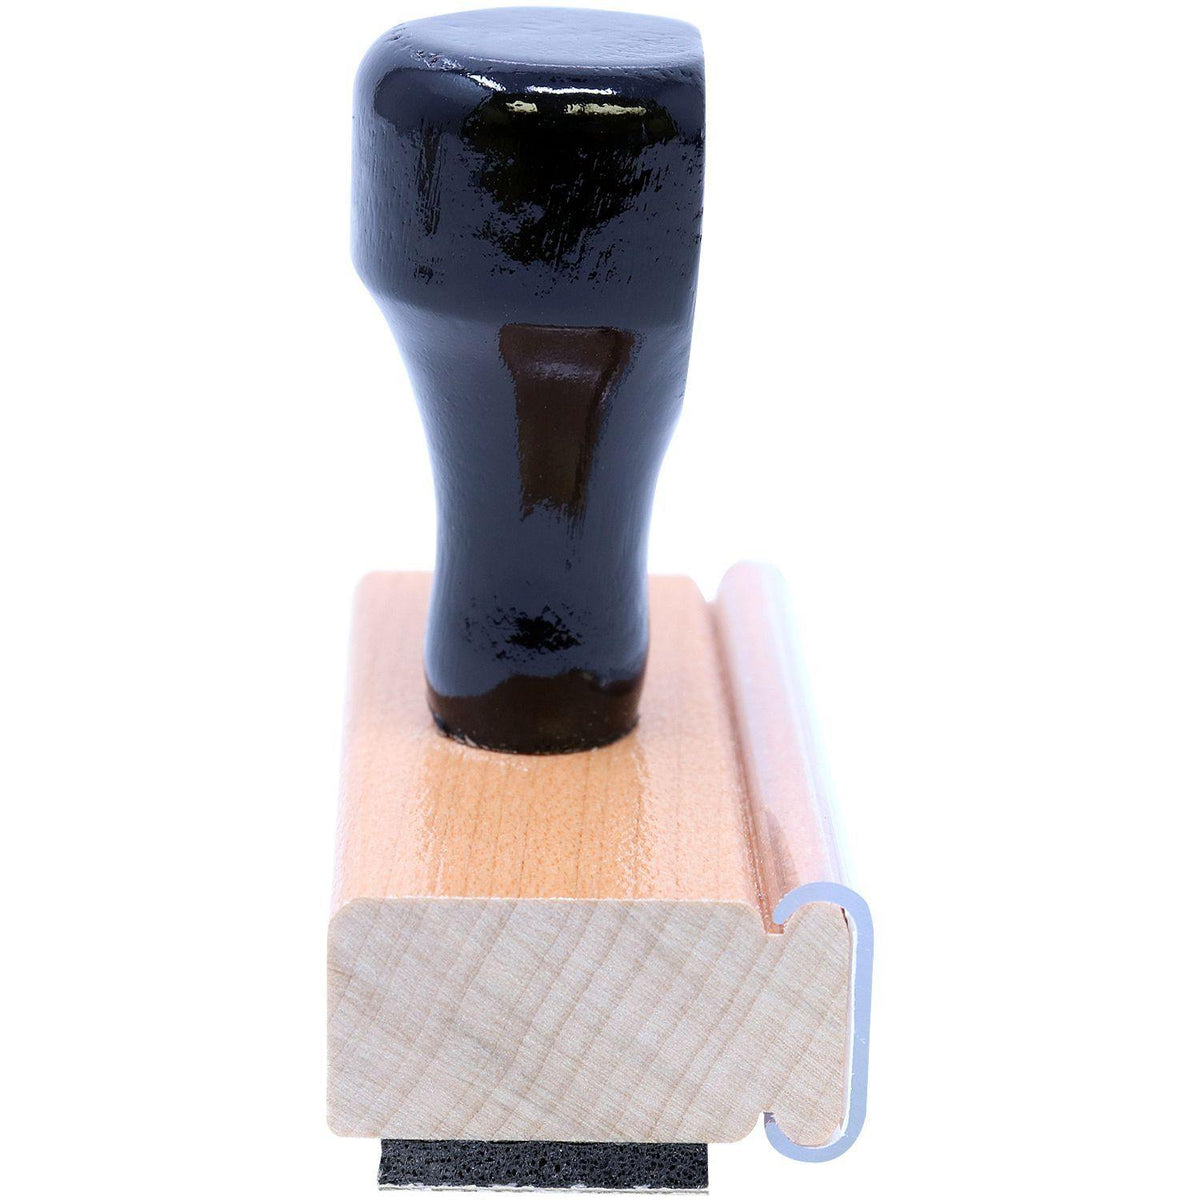 Narrow Font Approved for Payment Rubber Stamp - Engineer Seal Stamps - Brand_Acorn, Impression Size_Small, Stamp Type_Regular Stamp, Type of Use_Business, Type of Use_Finance, Type of Use_Office